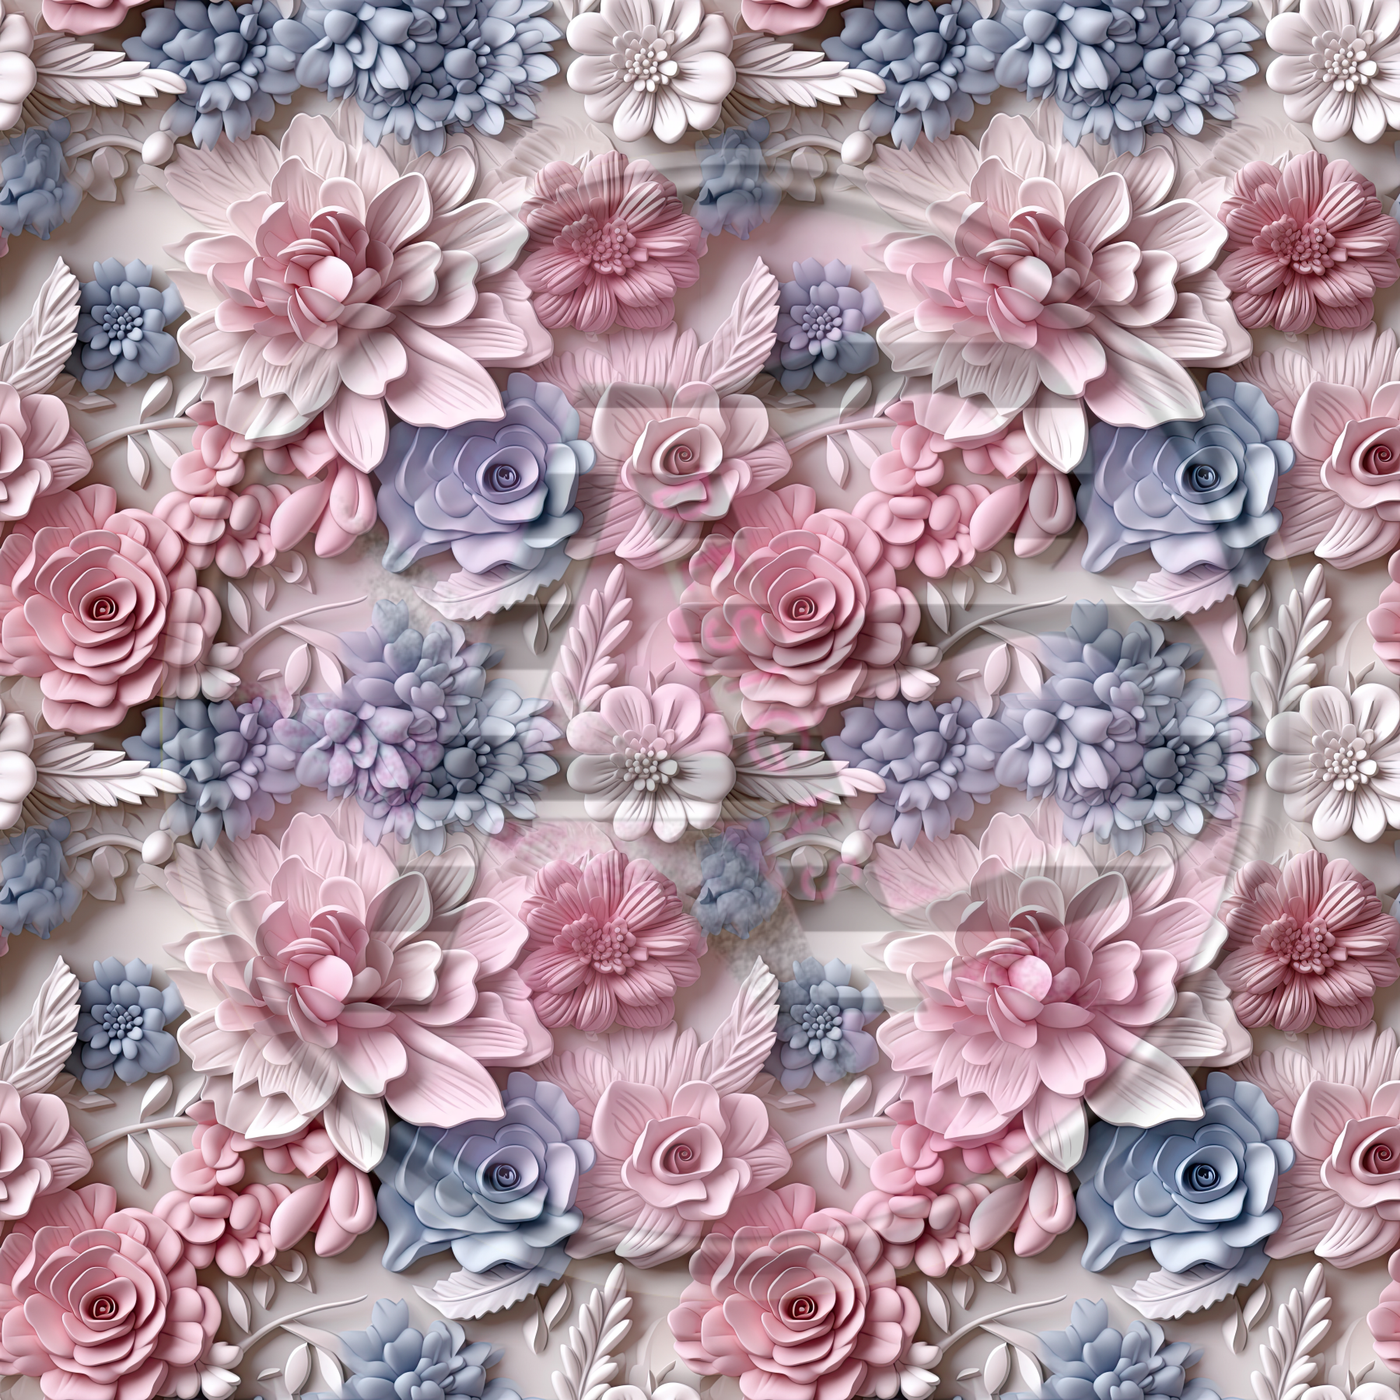 Adhesive Patterned Vinyl - 3D Floral 10 Smaller